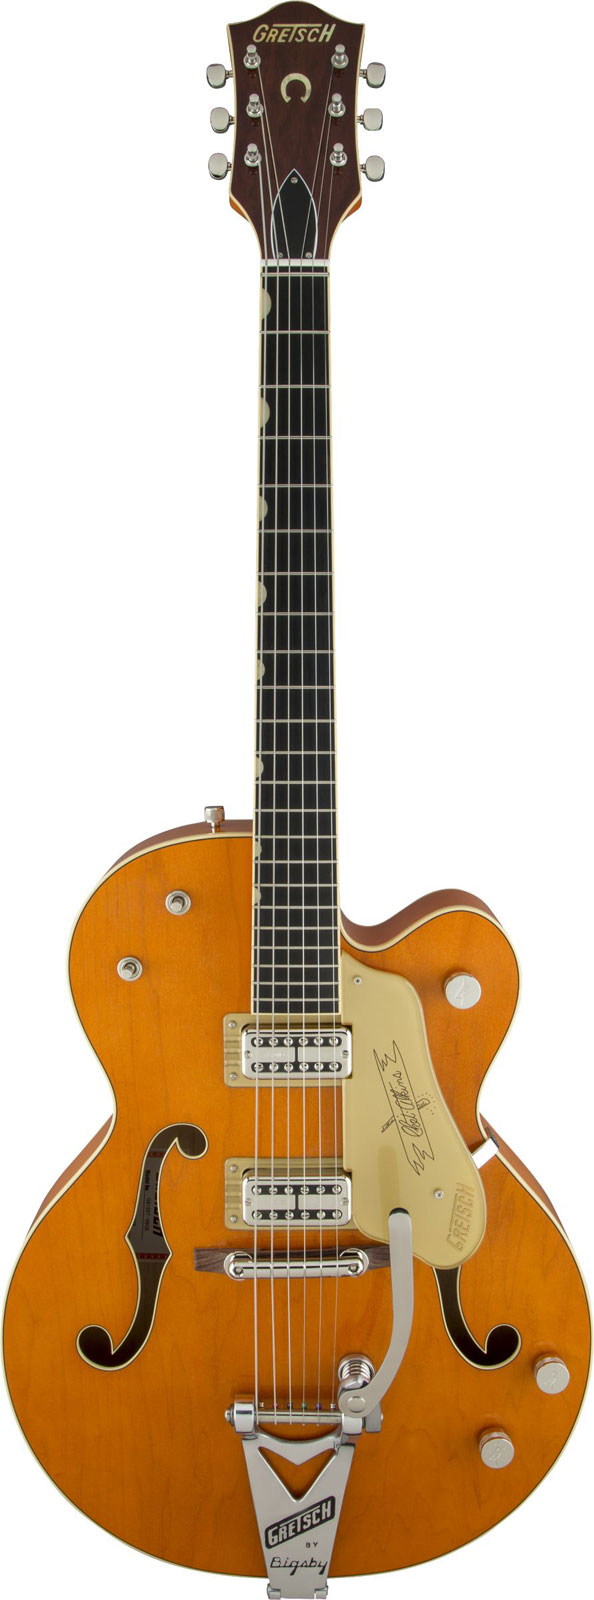 GRETSCH GUITARS G6120T-59 VINTAGE SELECT EDITION '59 CHET ATKINS HOLLOW BODY WITH BIGSBY, TV JONES, VINTAGE ORANGE S